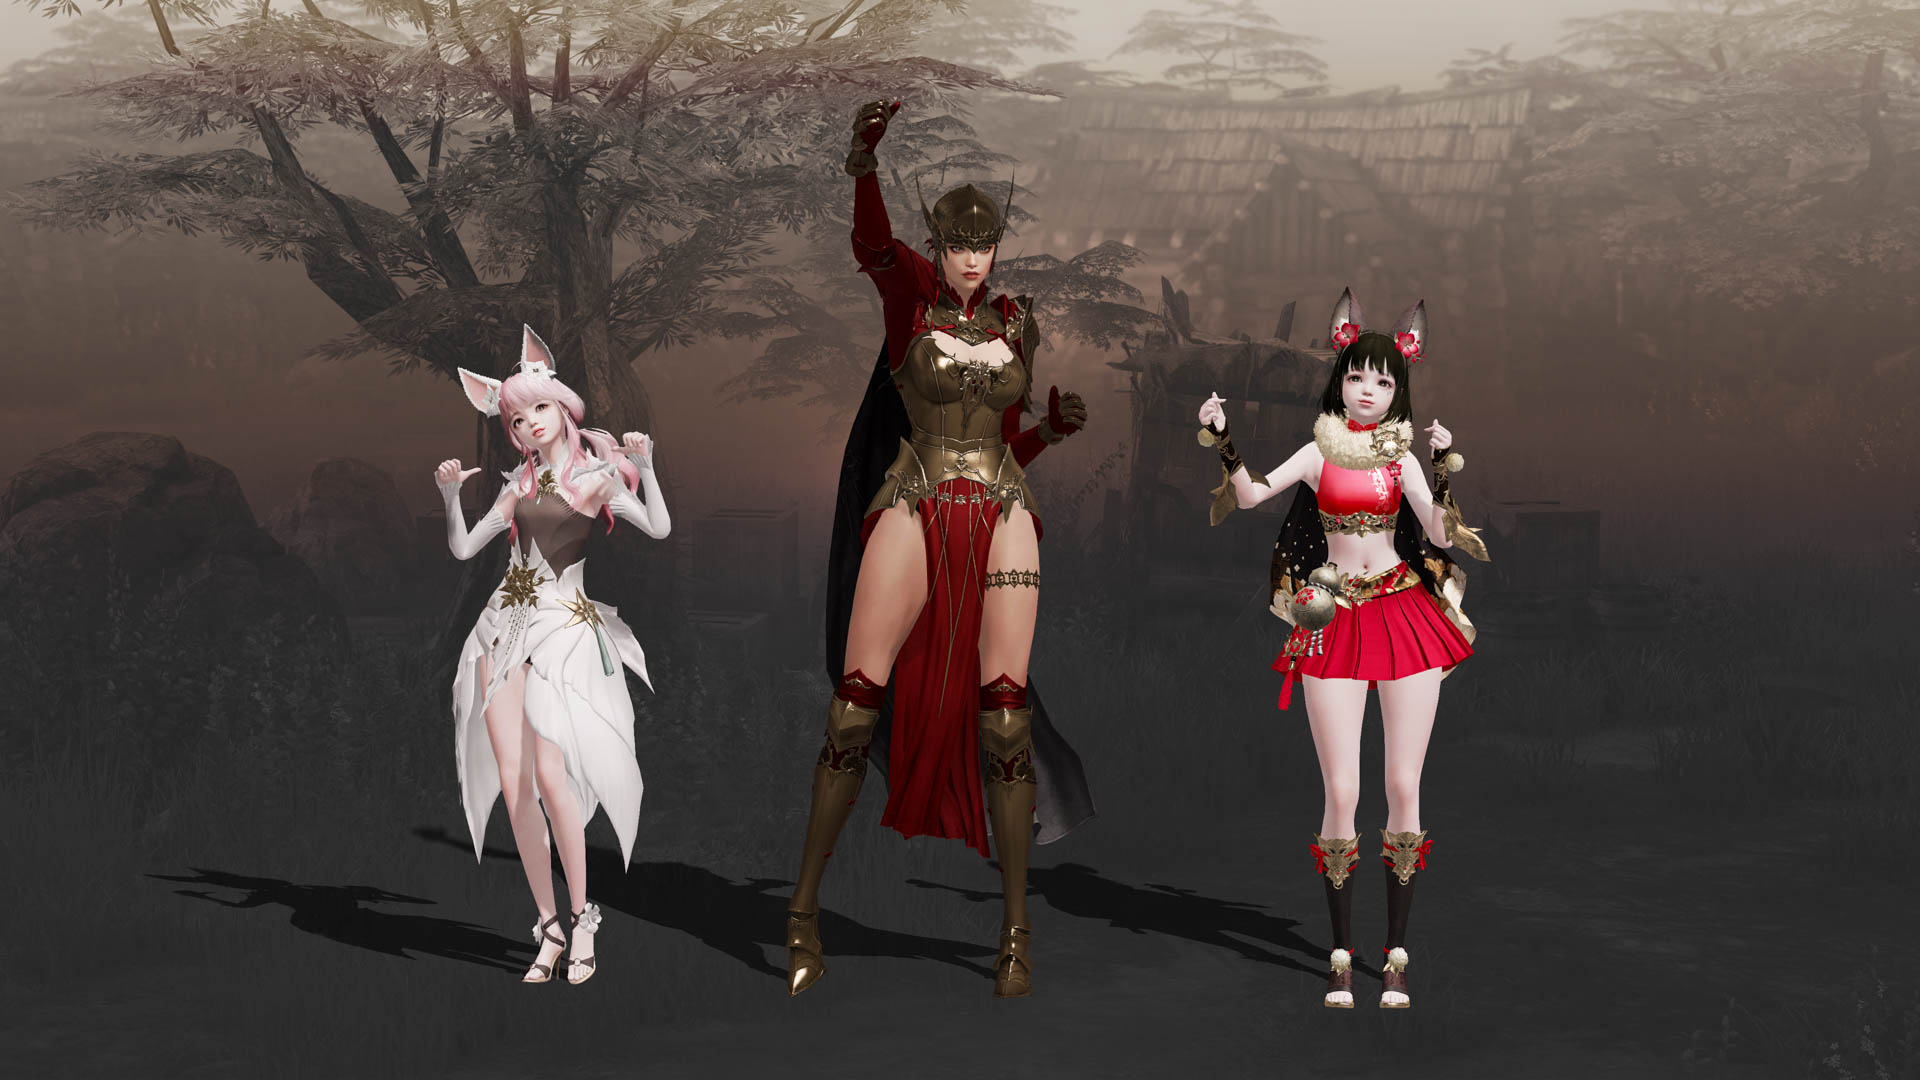 Lost Ark March 24 update: Server maintenance times, PvP Season 1, free  gifts - Dexerto